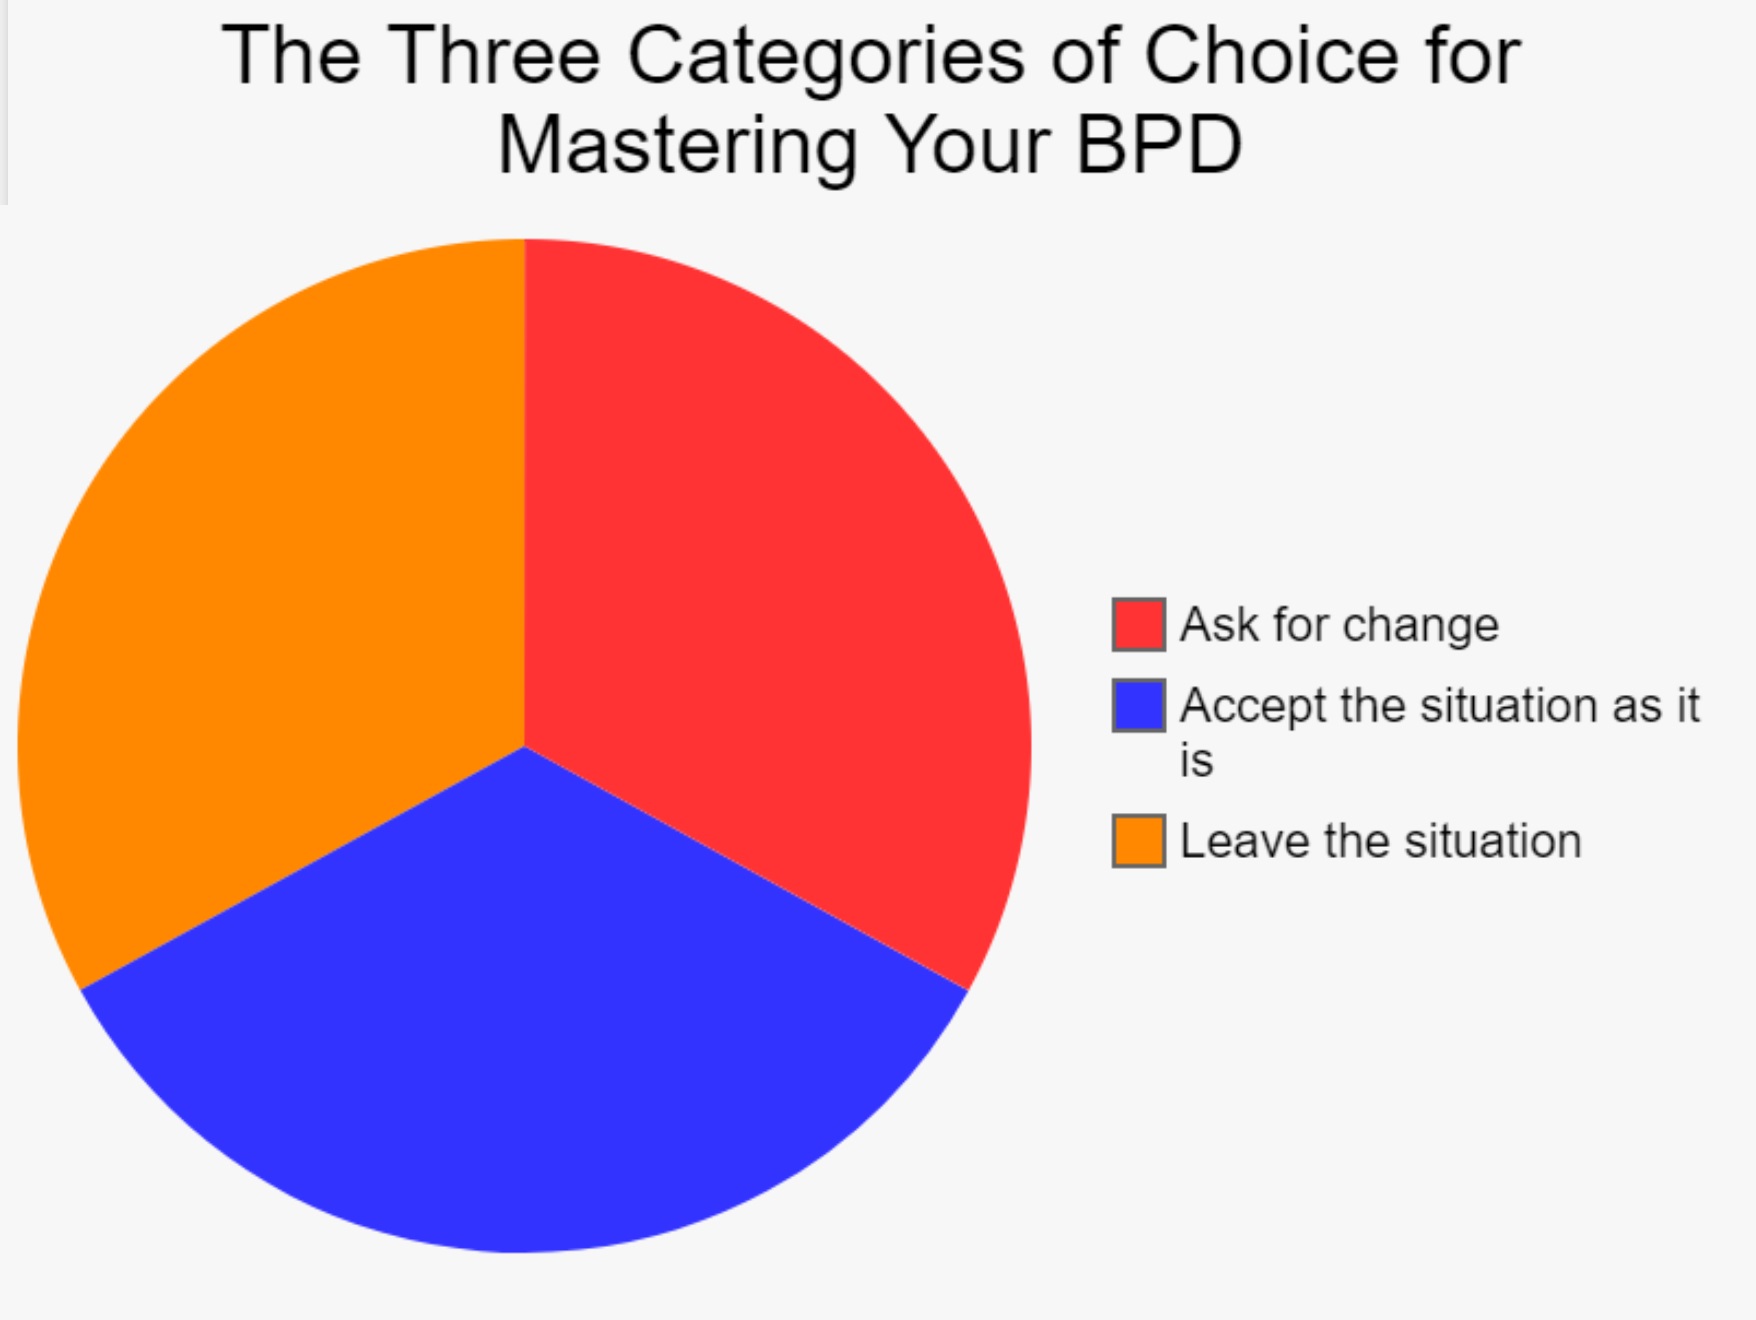 The Three Categories of Choice for Mastering Your BPD